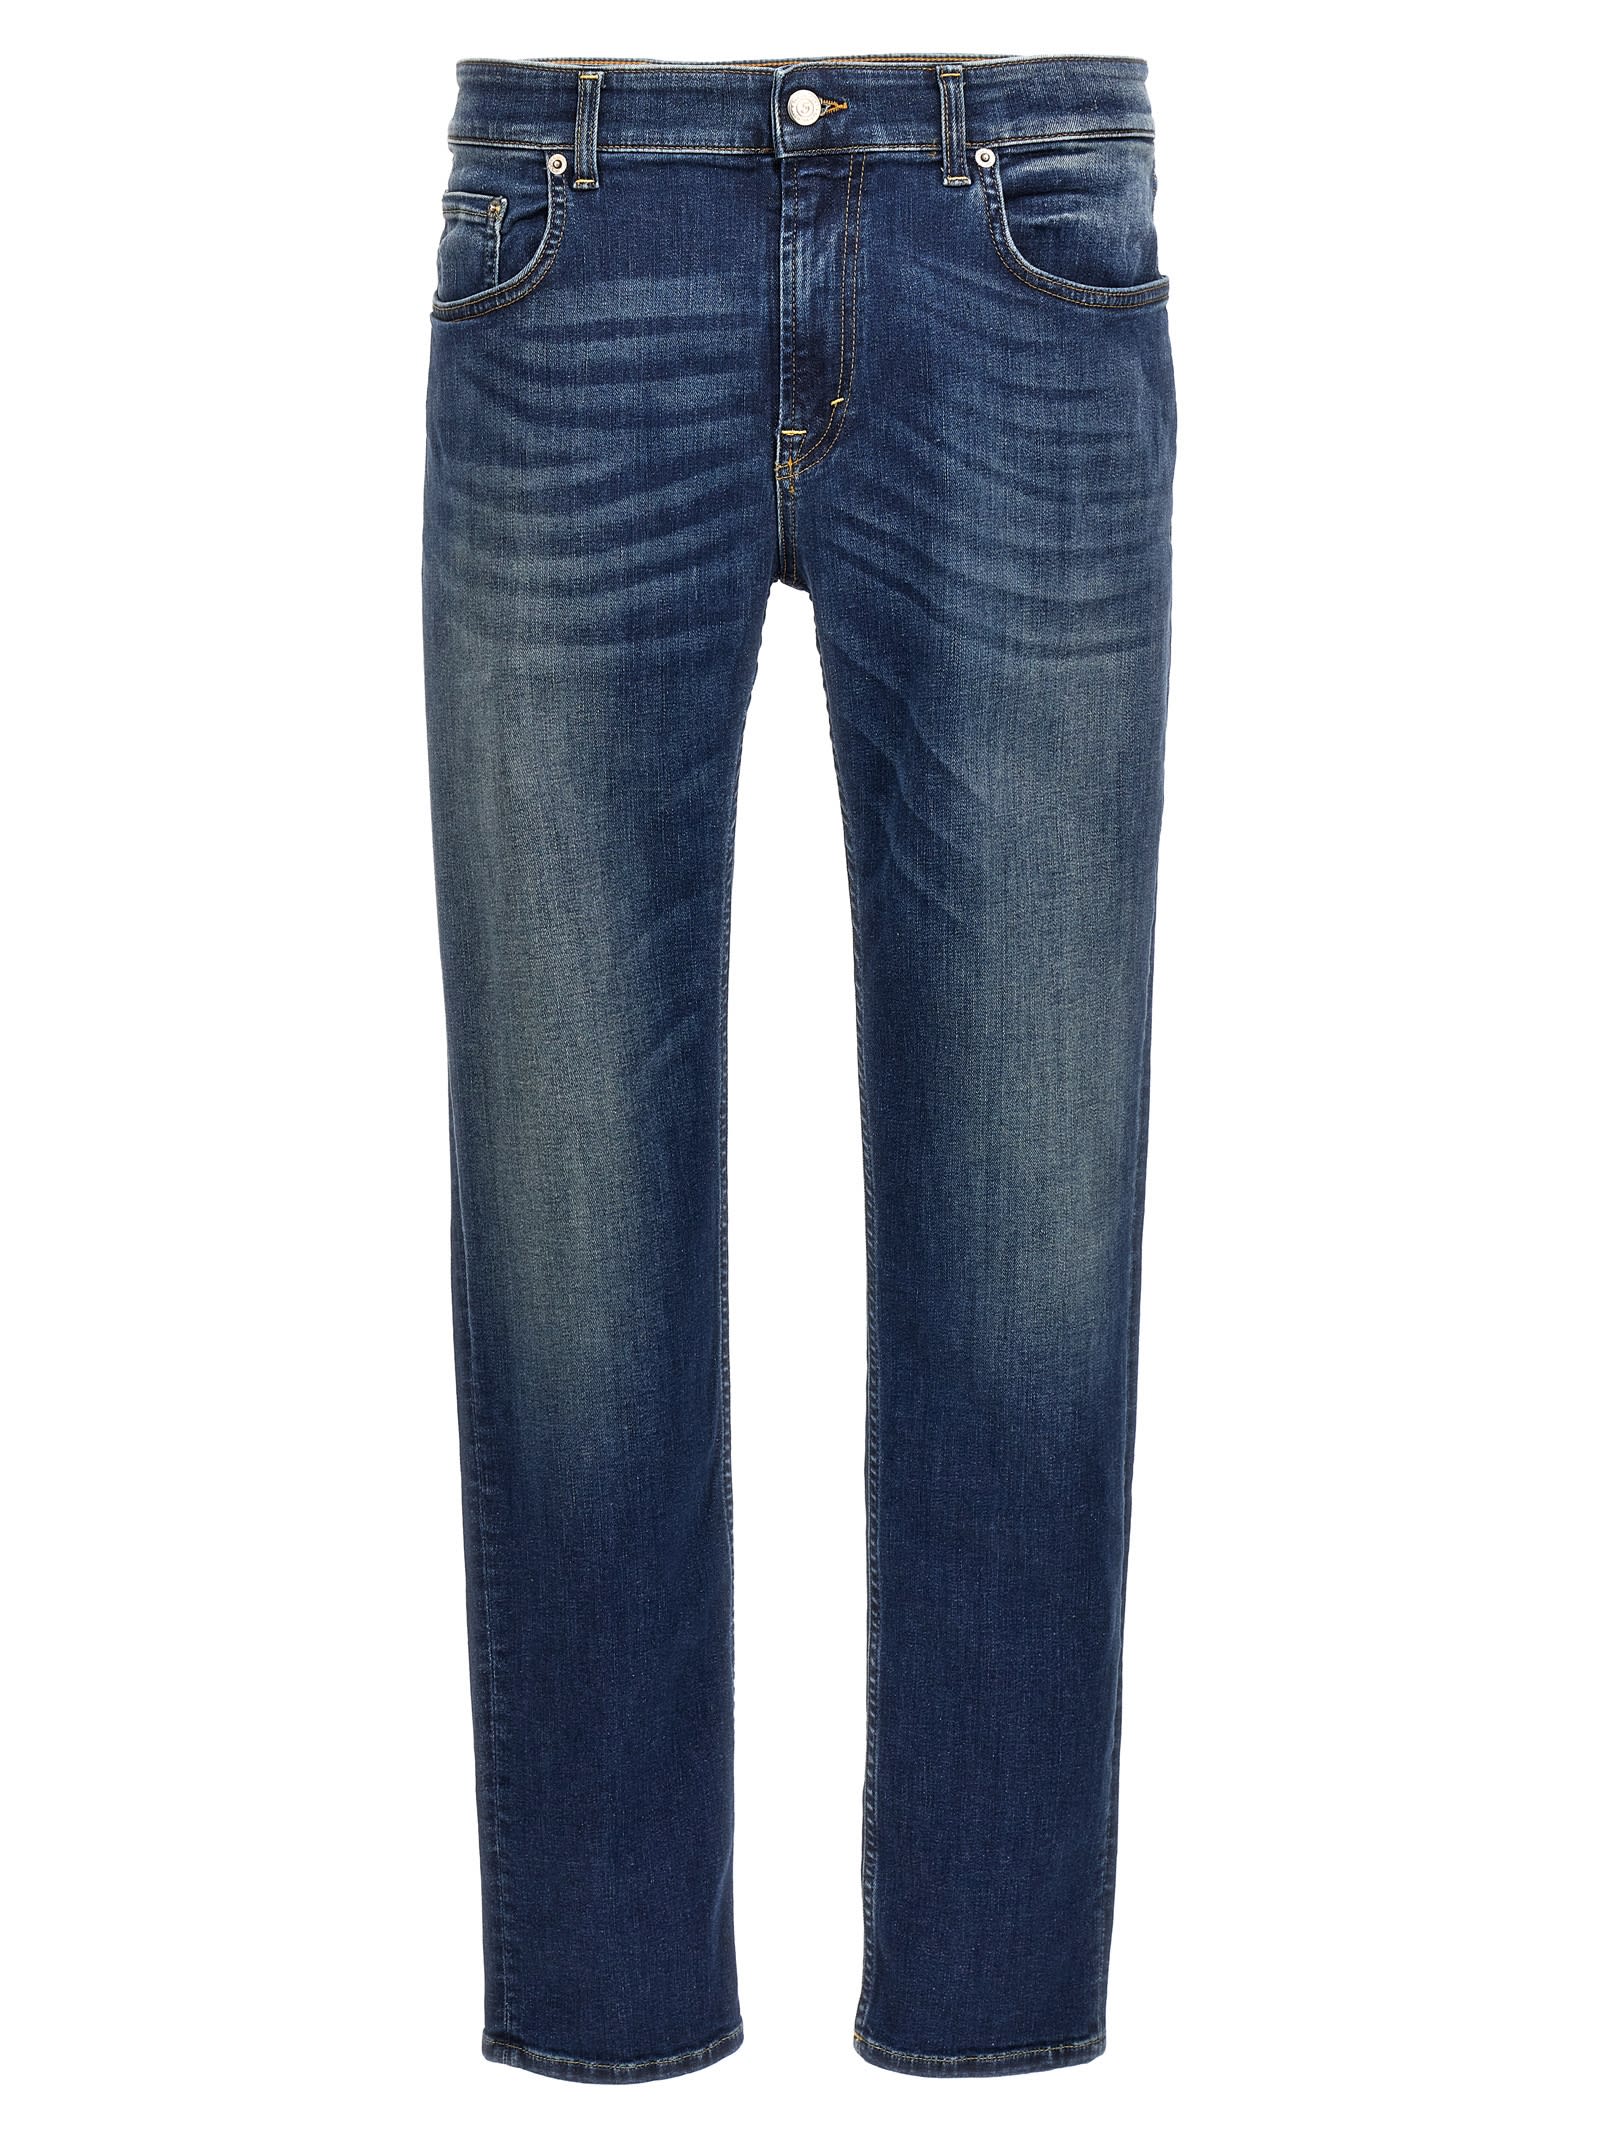 Department Five Skeith Jeans In Blue